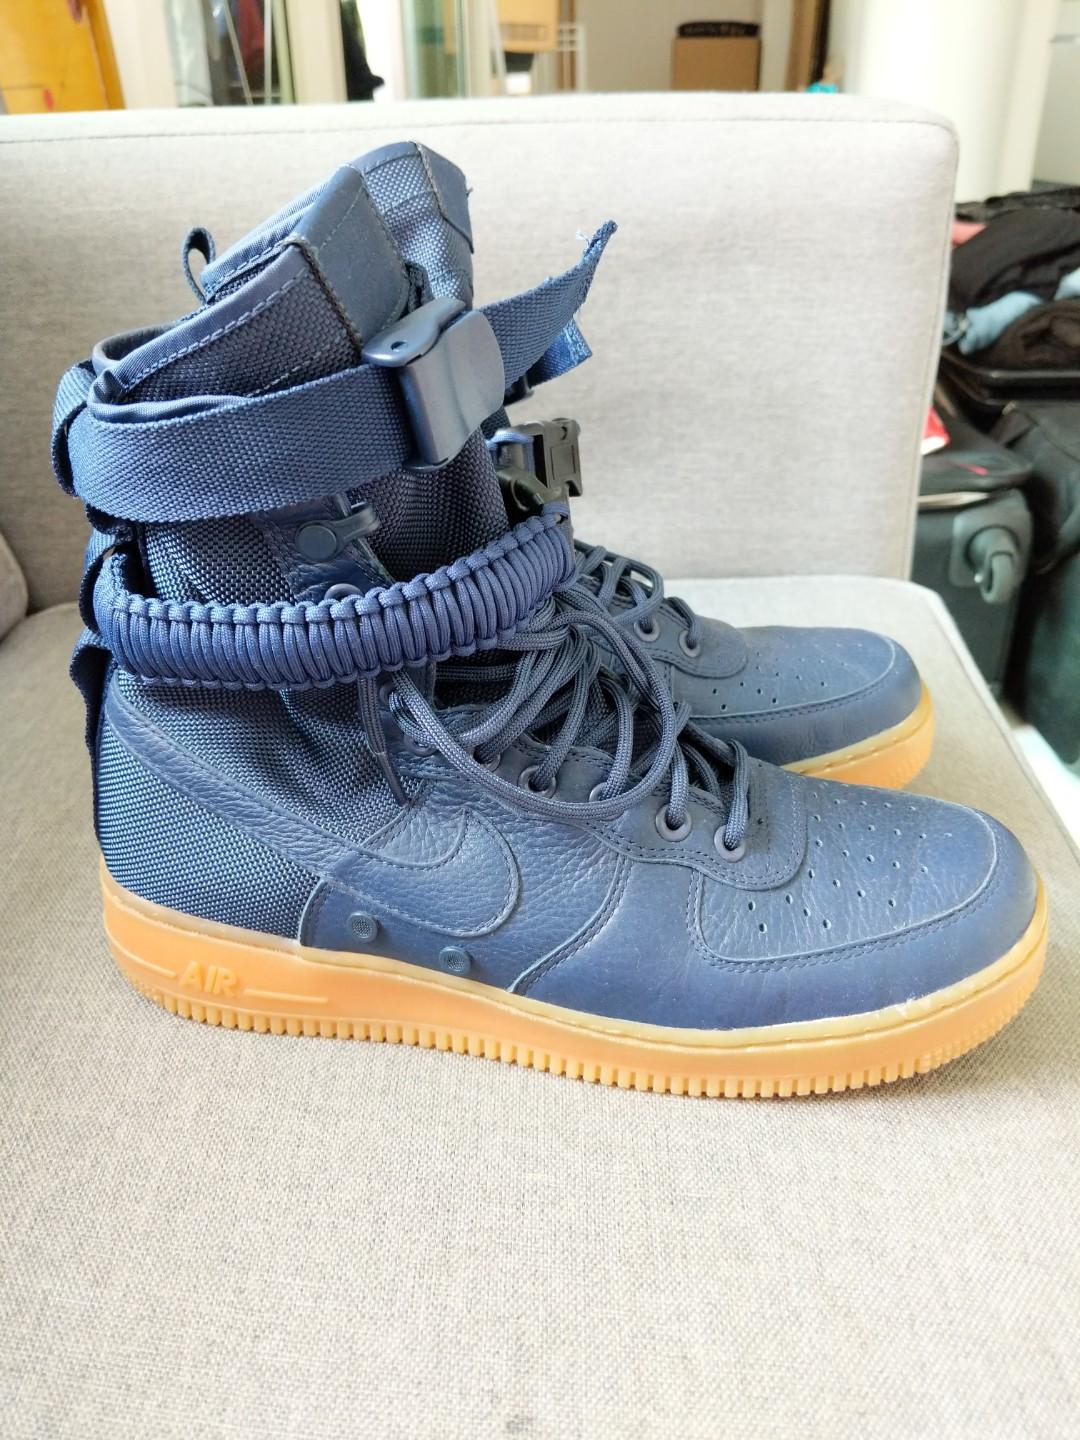 Nike Air Force 1 High Boots, Men's 